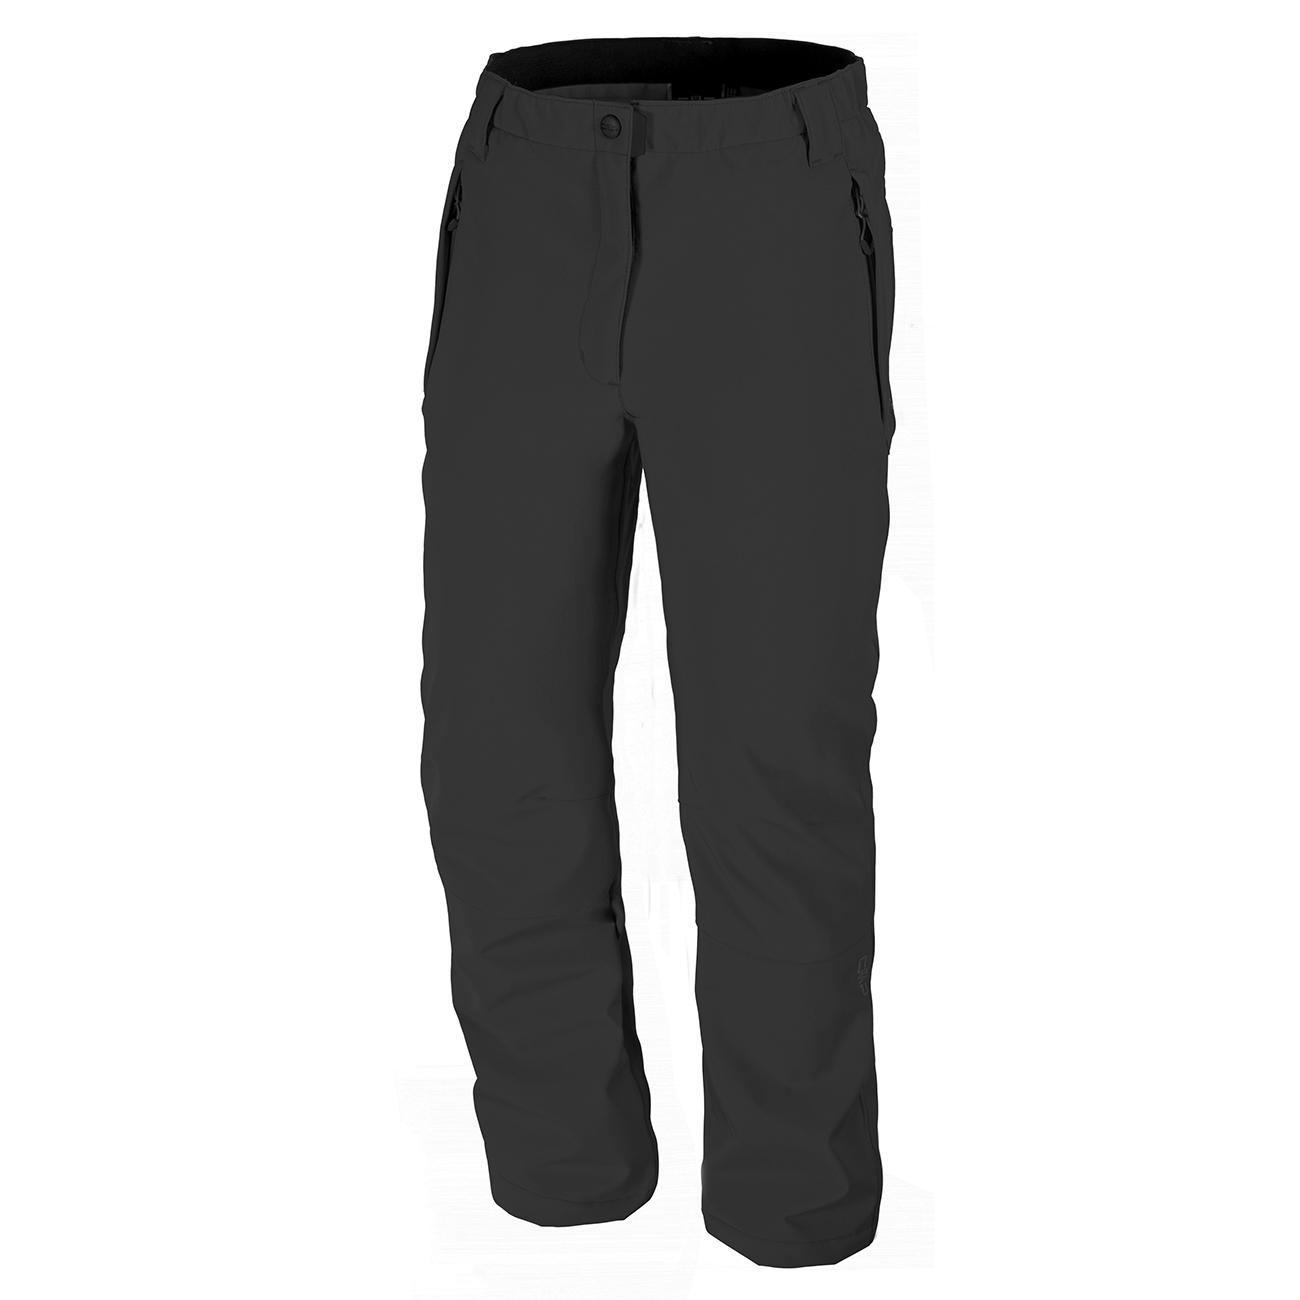 Softshell Trousers, Men - Thanks to softshell these trousers are slim ...